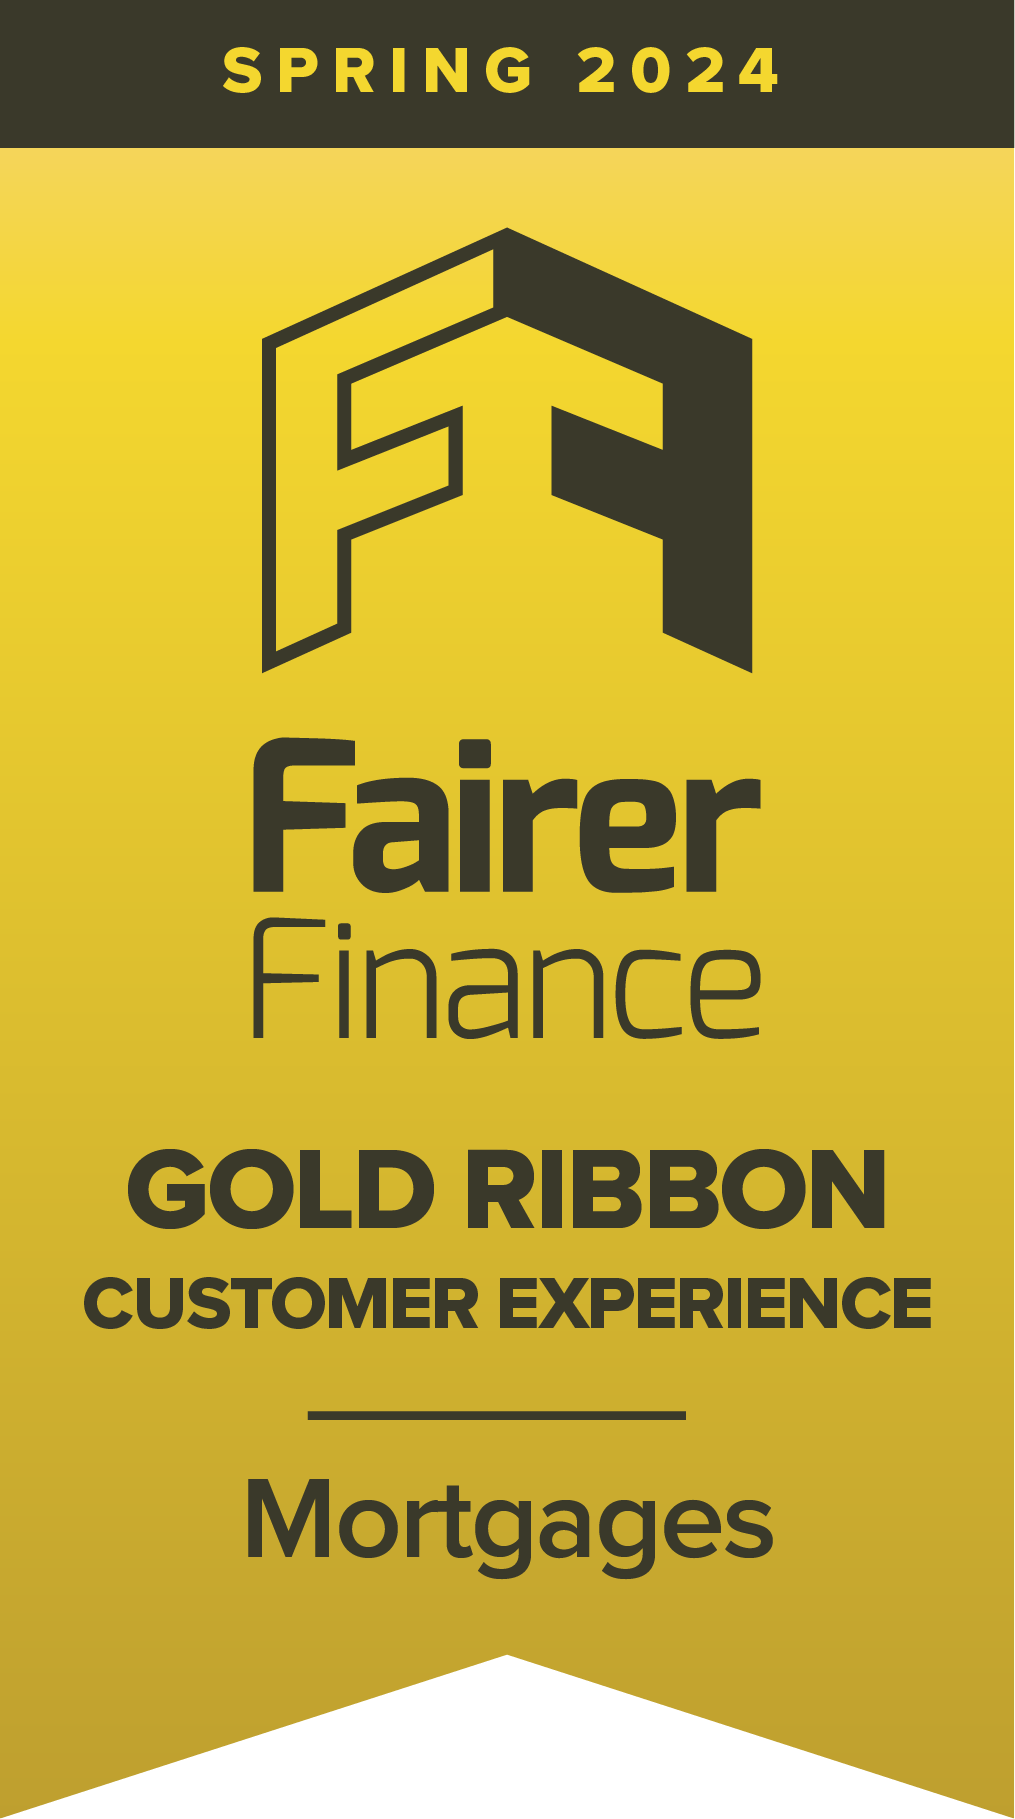 Fairer finance award - Number one for Customer Experience